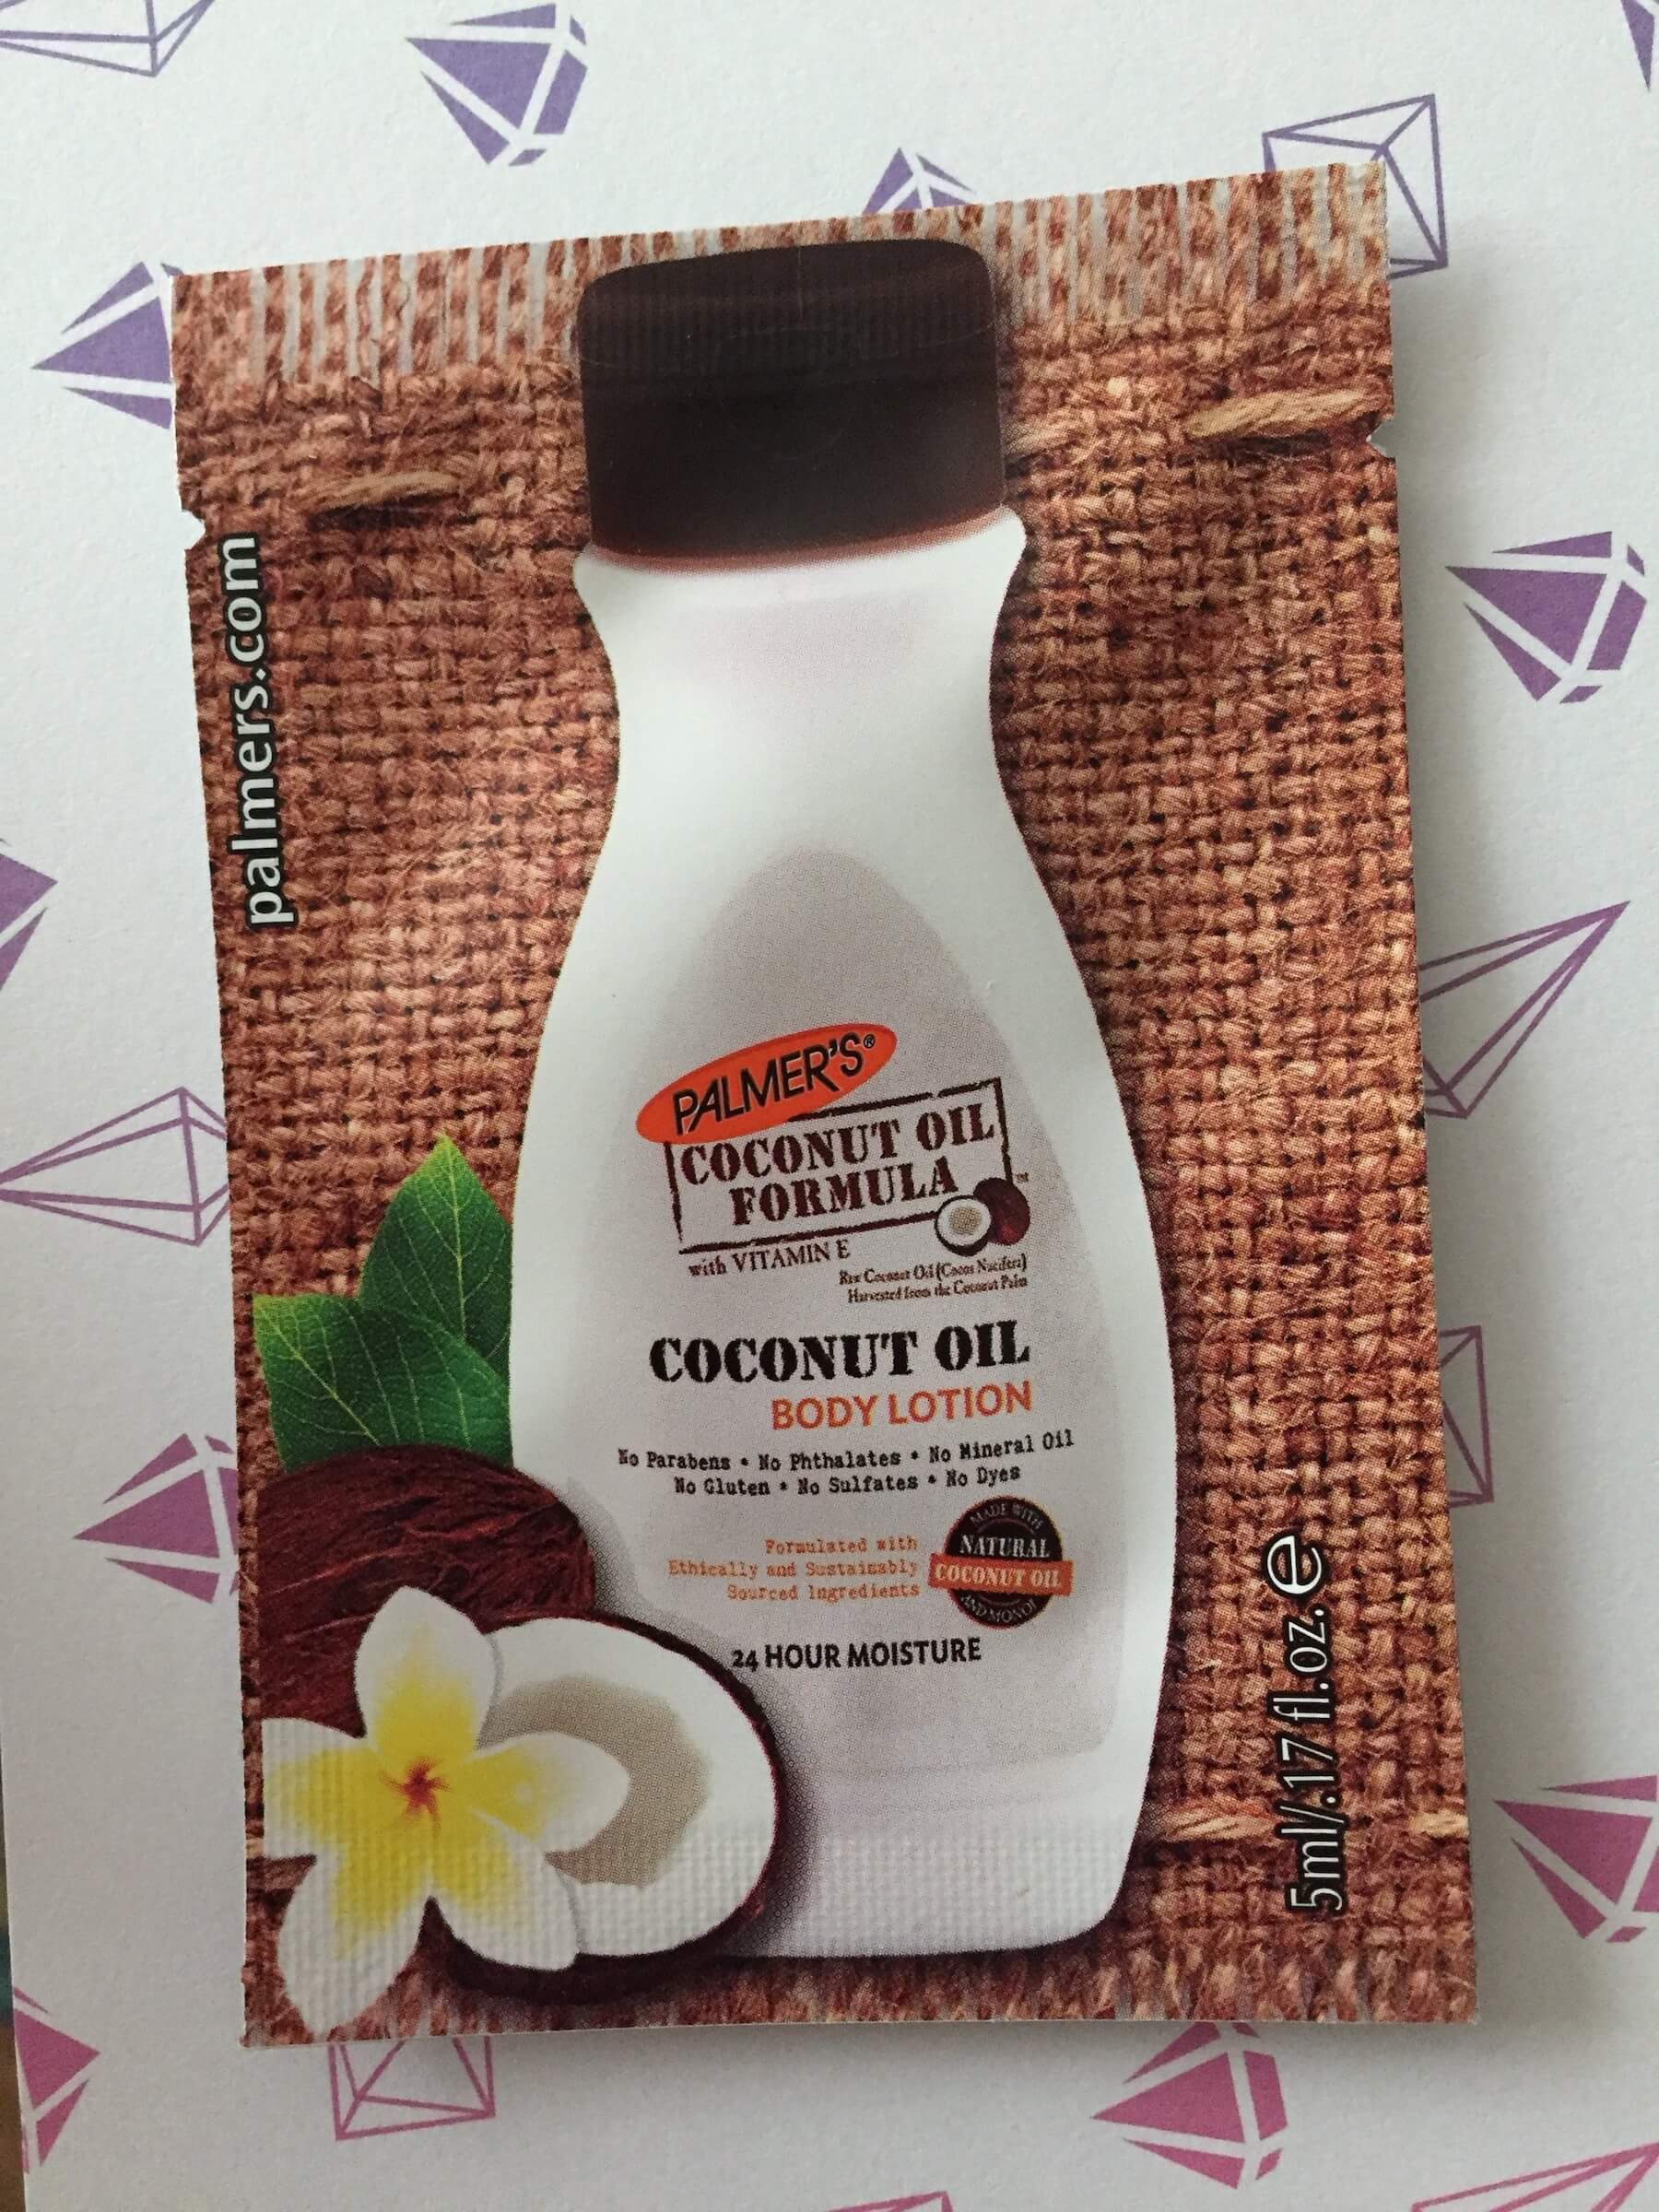 Palmer's Coconut Oil Body Lotion Review